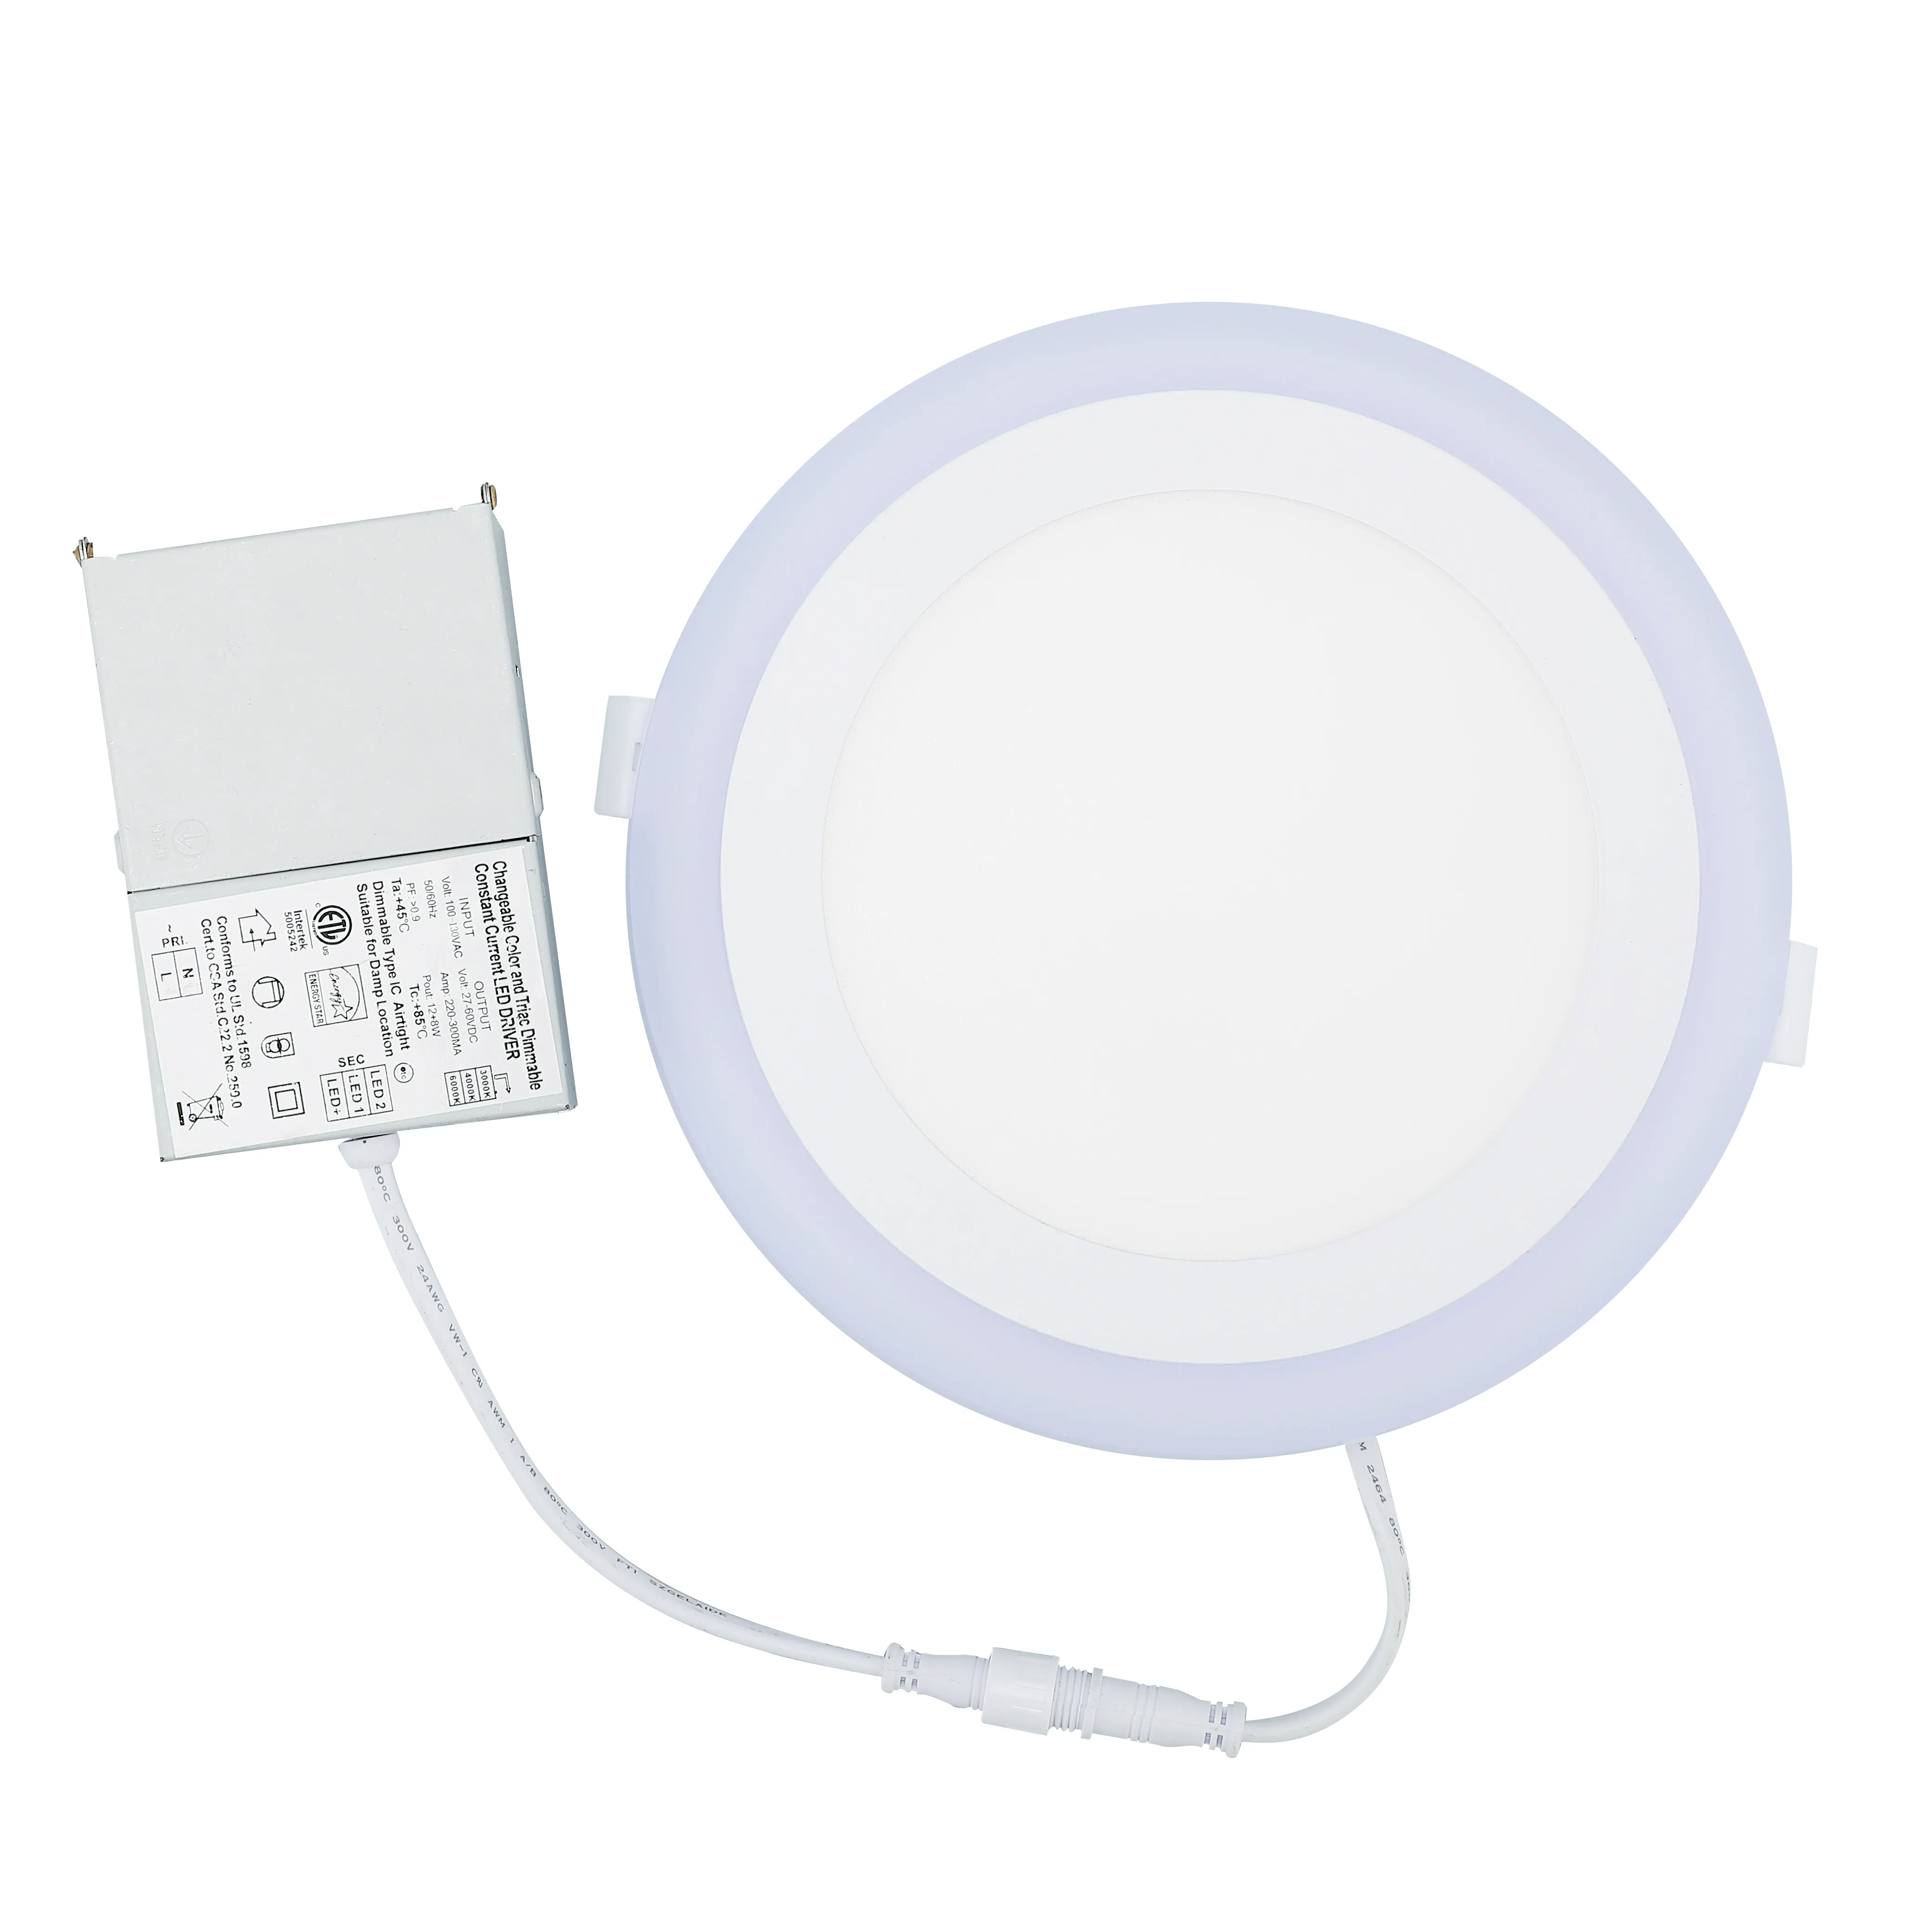 ETL ES Recessed 4inch LED Panel Light Double Color Blue and White 3CCT Adjustable by DIP Switch 9W+4W Round Decorative Lighting